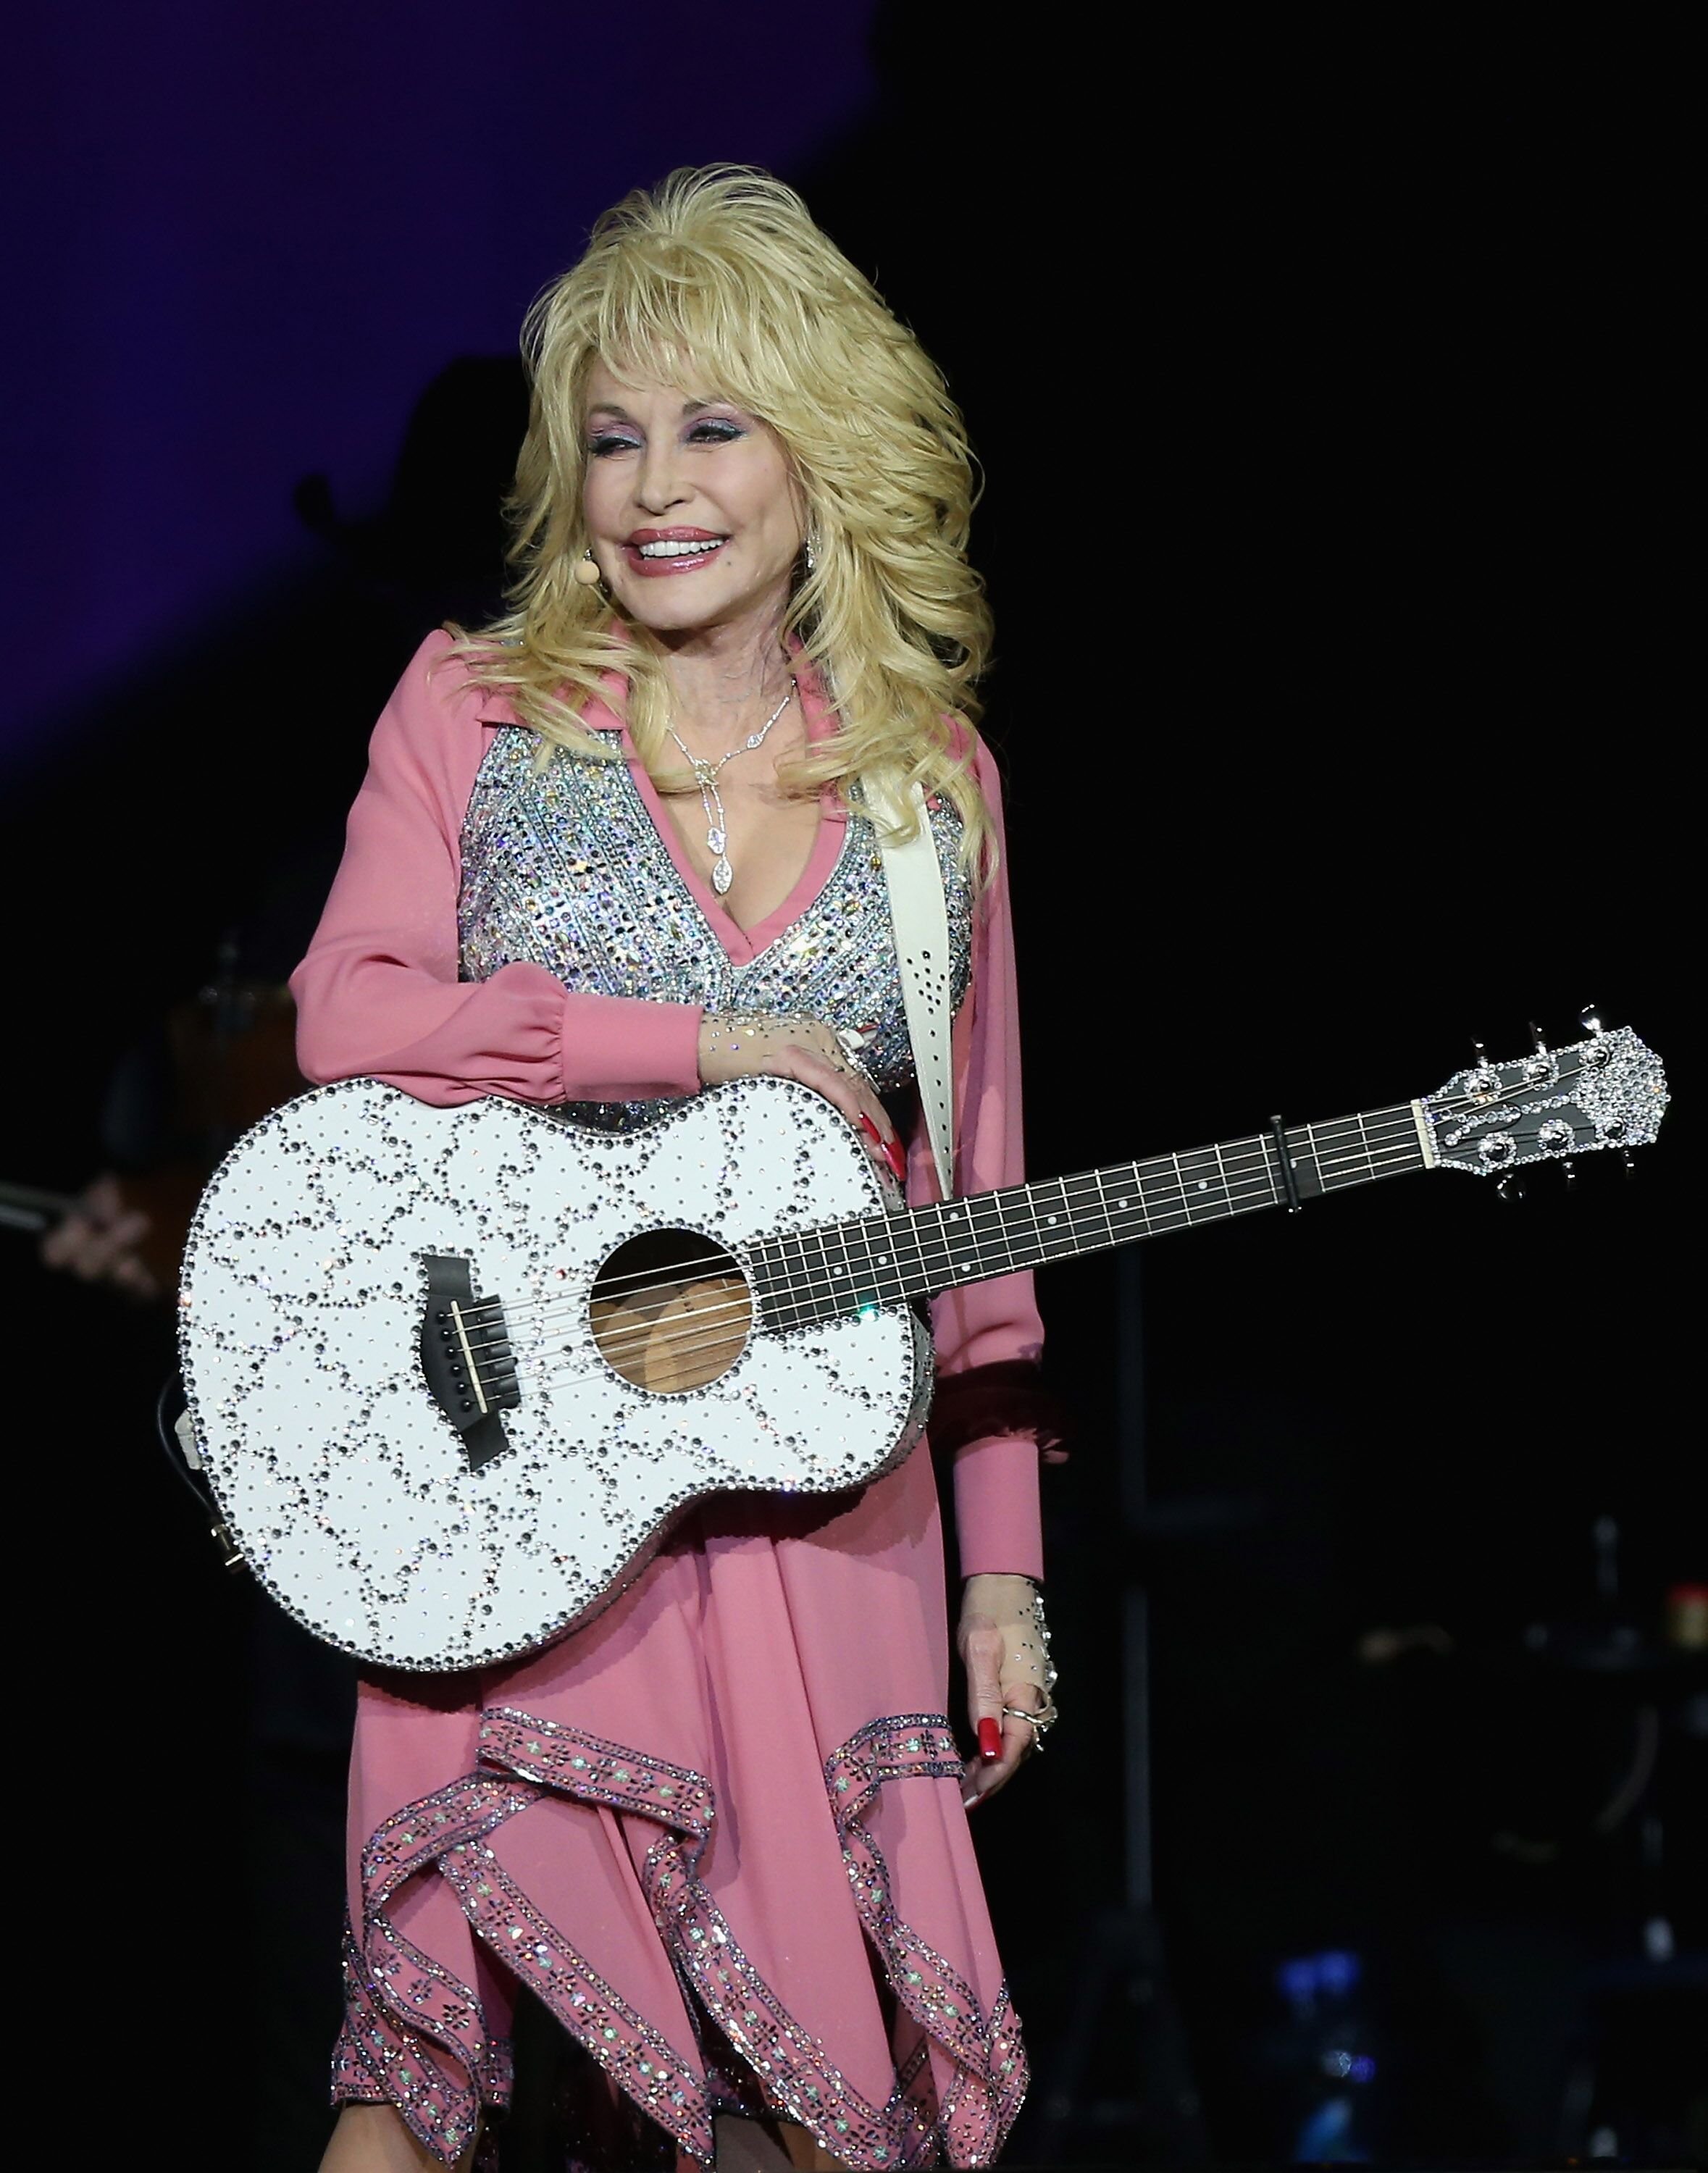 Dolly Parton performs live for fans at Vector Arena on February 7, 2014. | Source: Getty Images